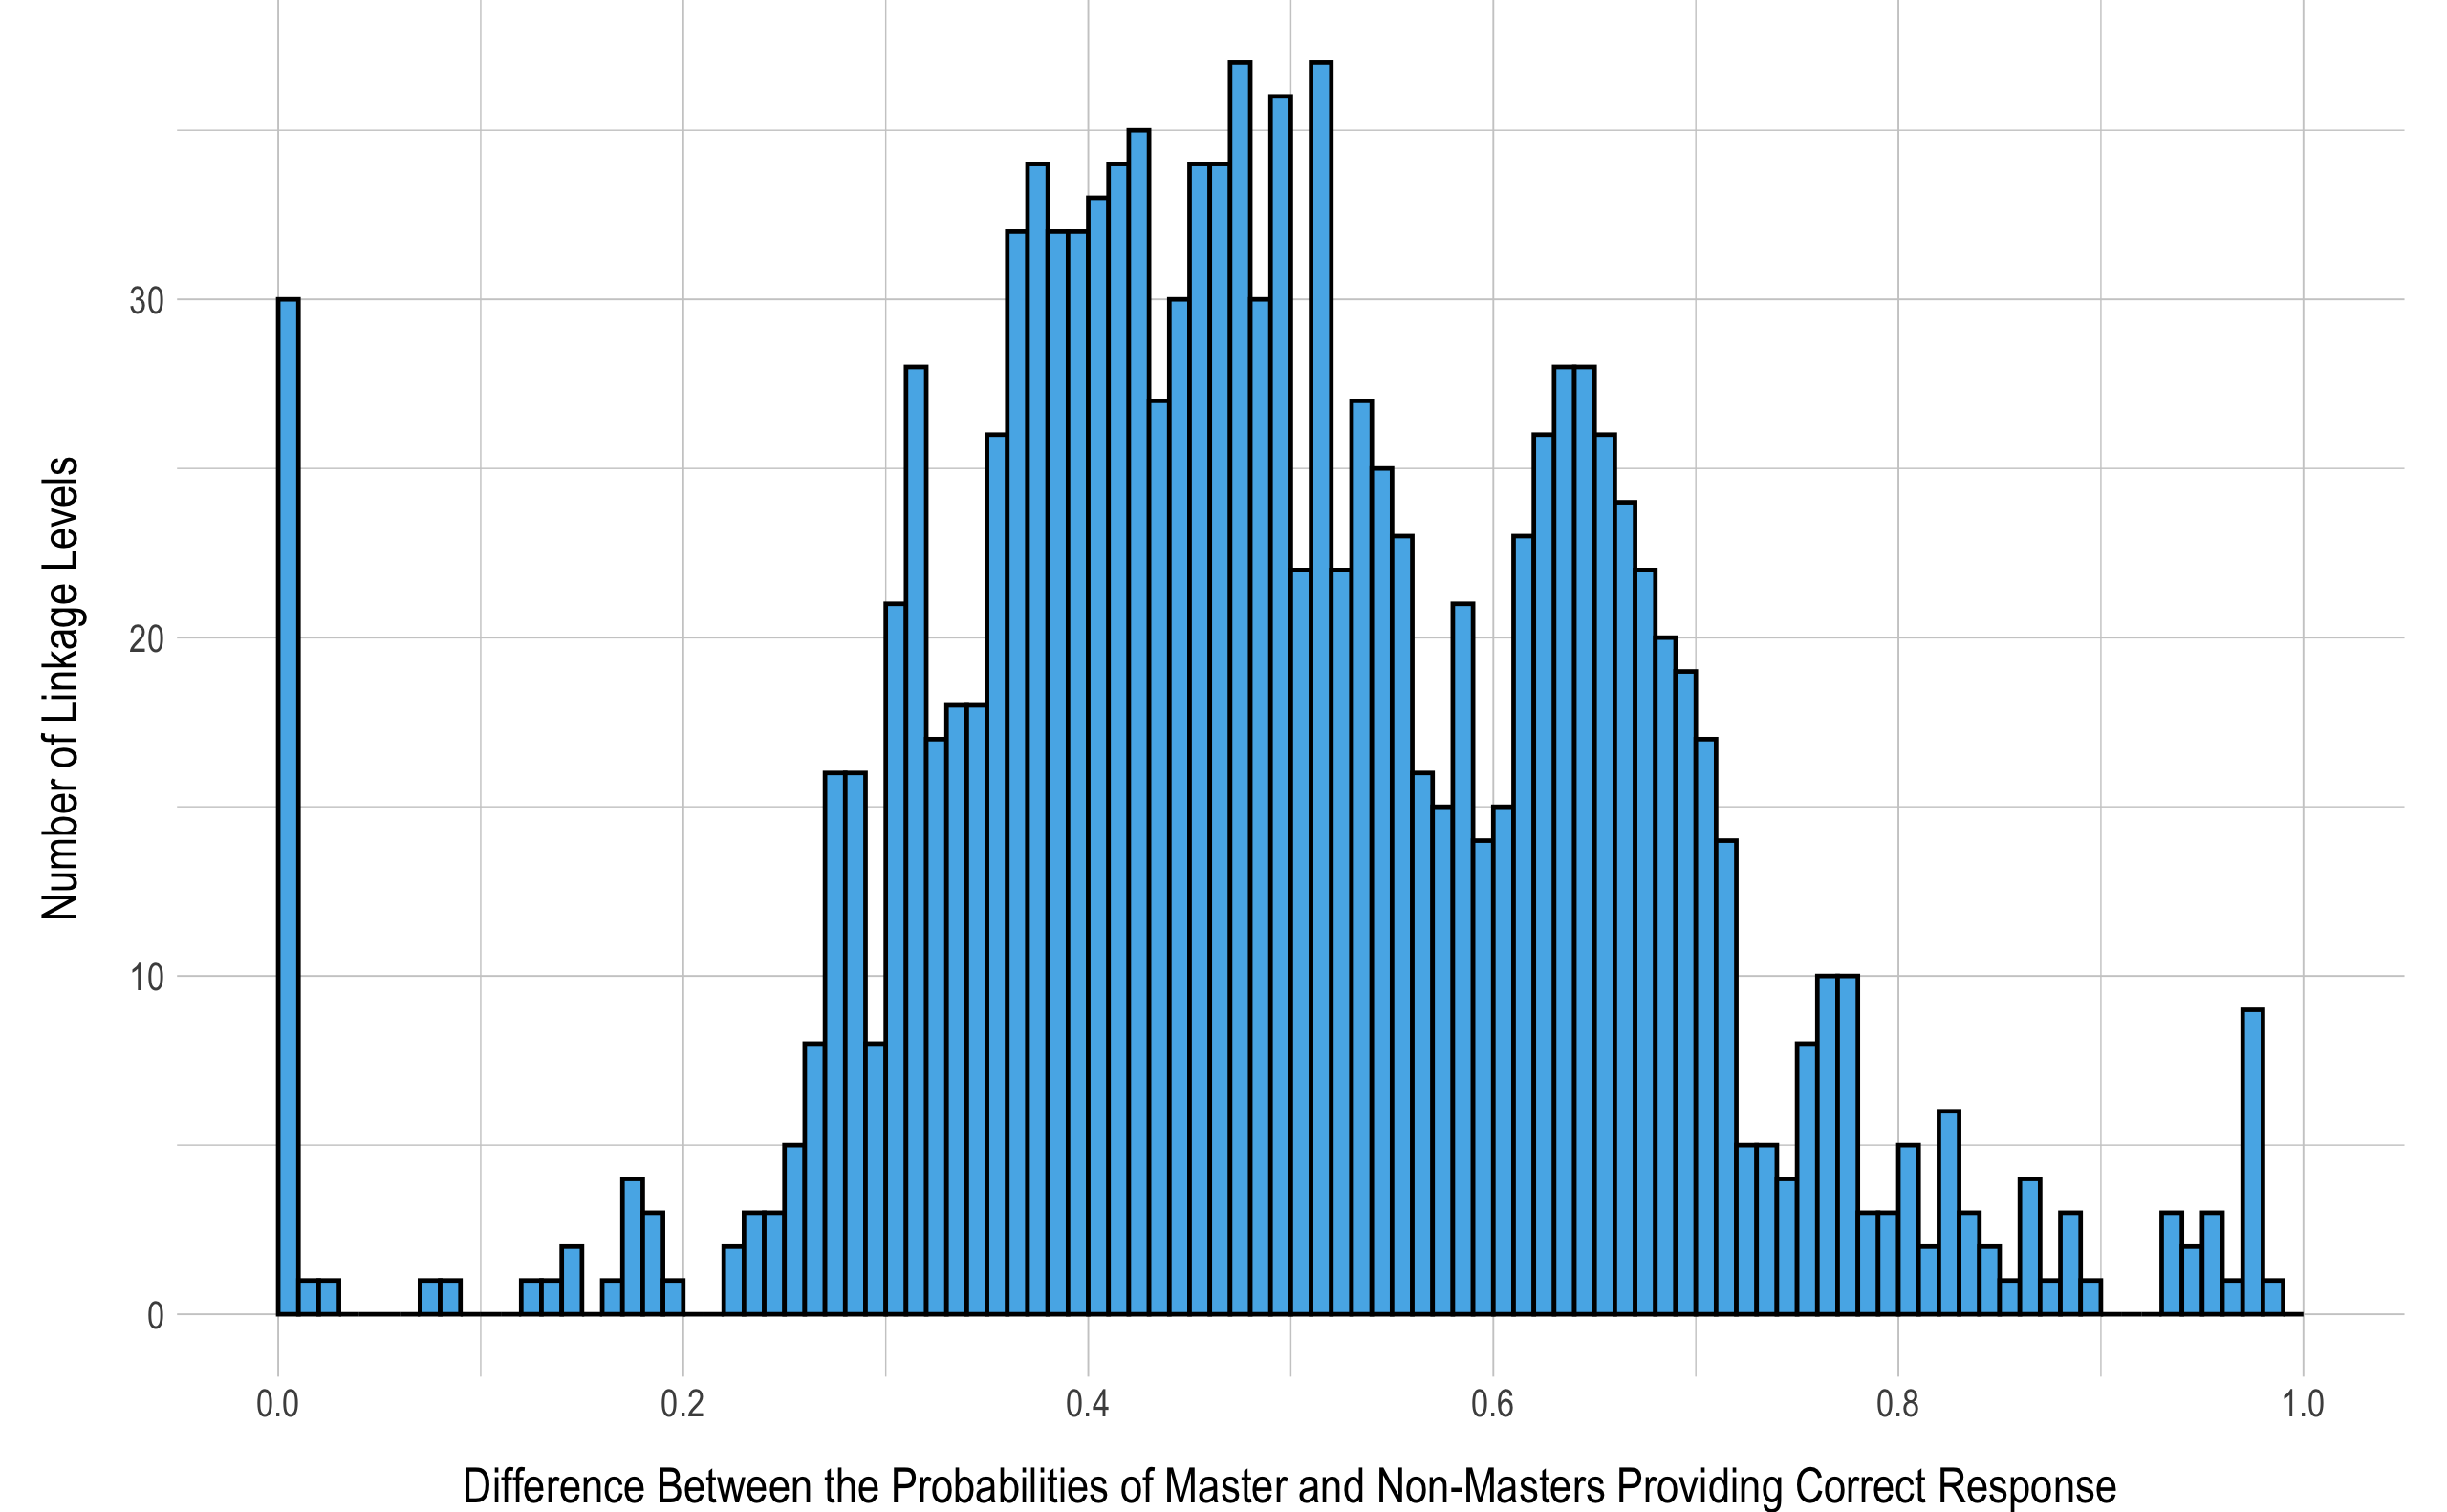 Difference Between Masters’ and Non-masters’ Probability of Providing a Correct Response to Items Measuring Each Linkage Level